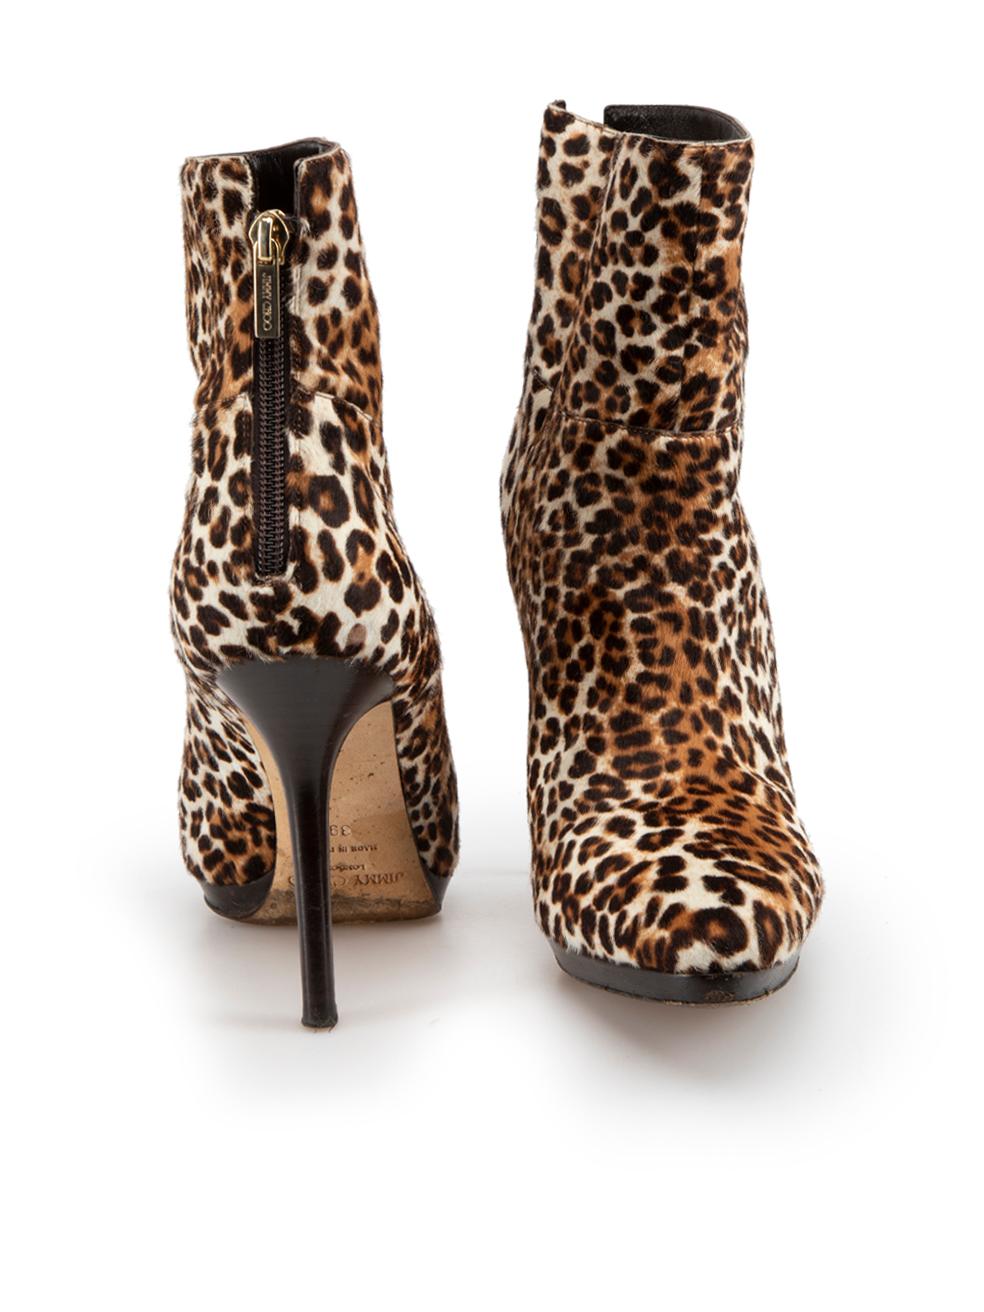 Leopard Pony Hair Stiletto Ankle Boots Size EU 39 In Good Condition For Sale In London, GB